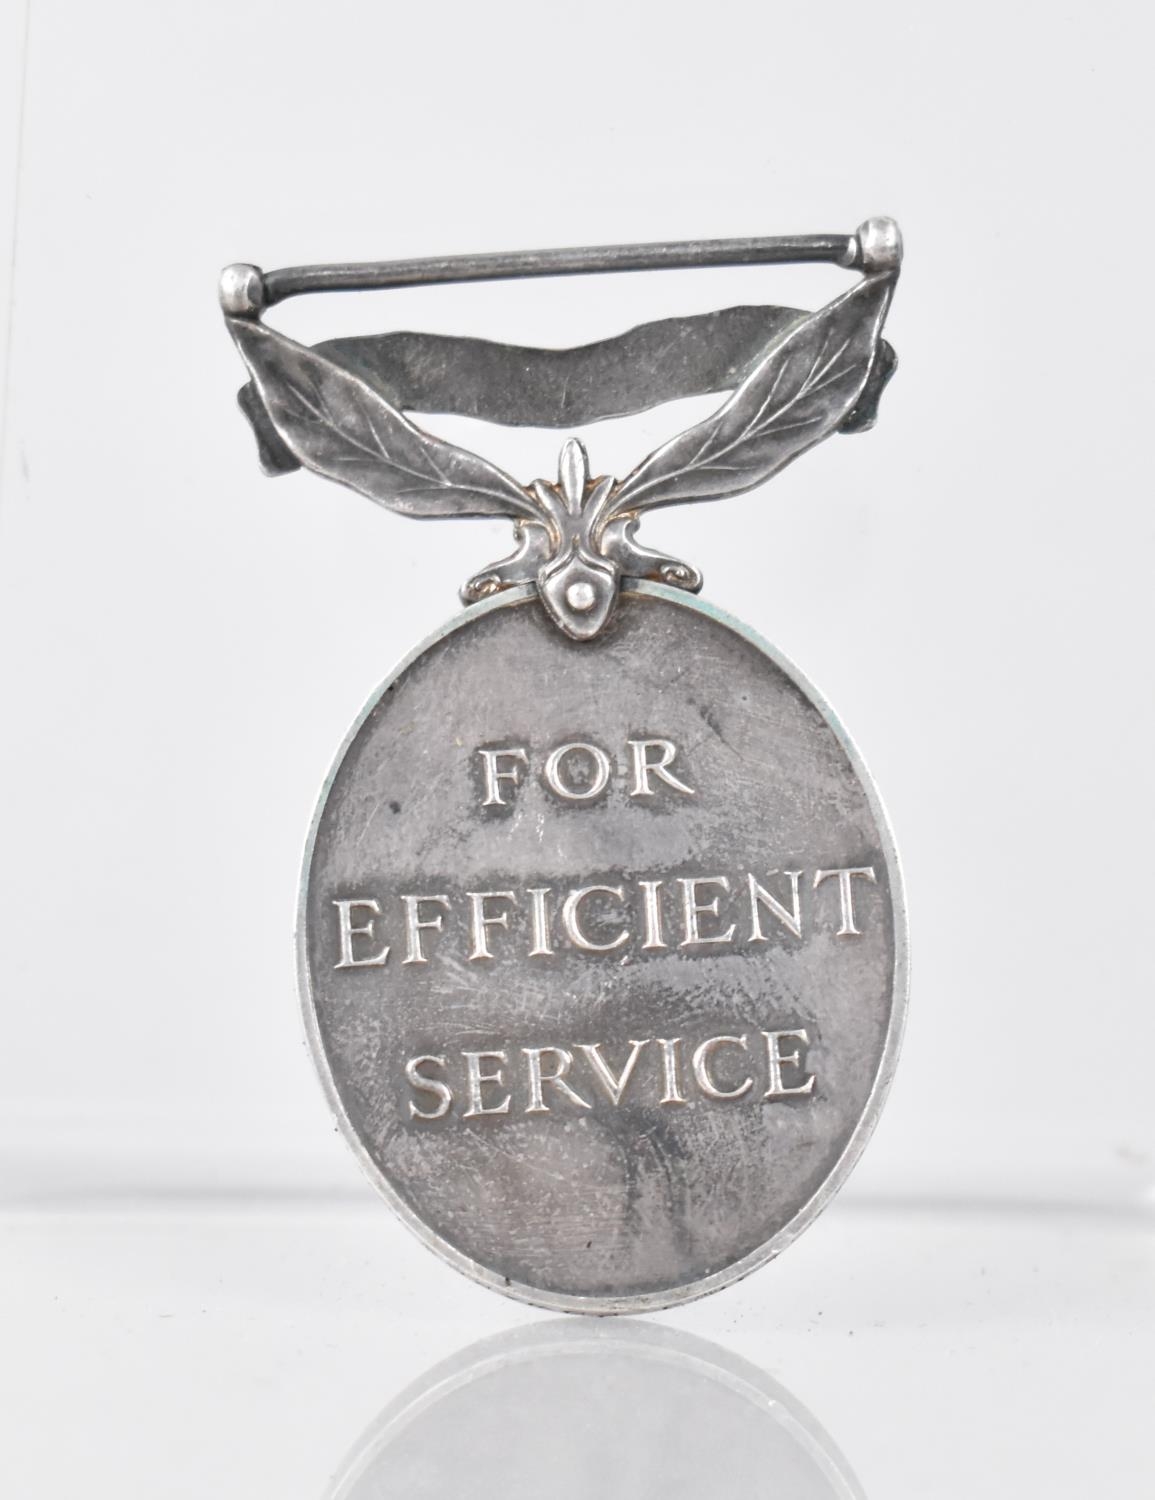 A Territorial Army "For Efficient Service" Medal Awarded to 855973 Sgt J Edward RA - Image 2 of 2